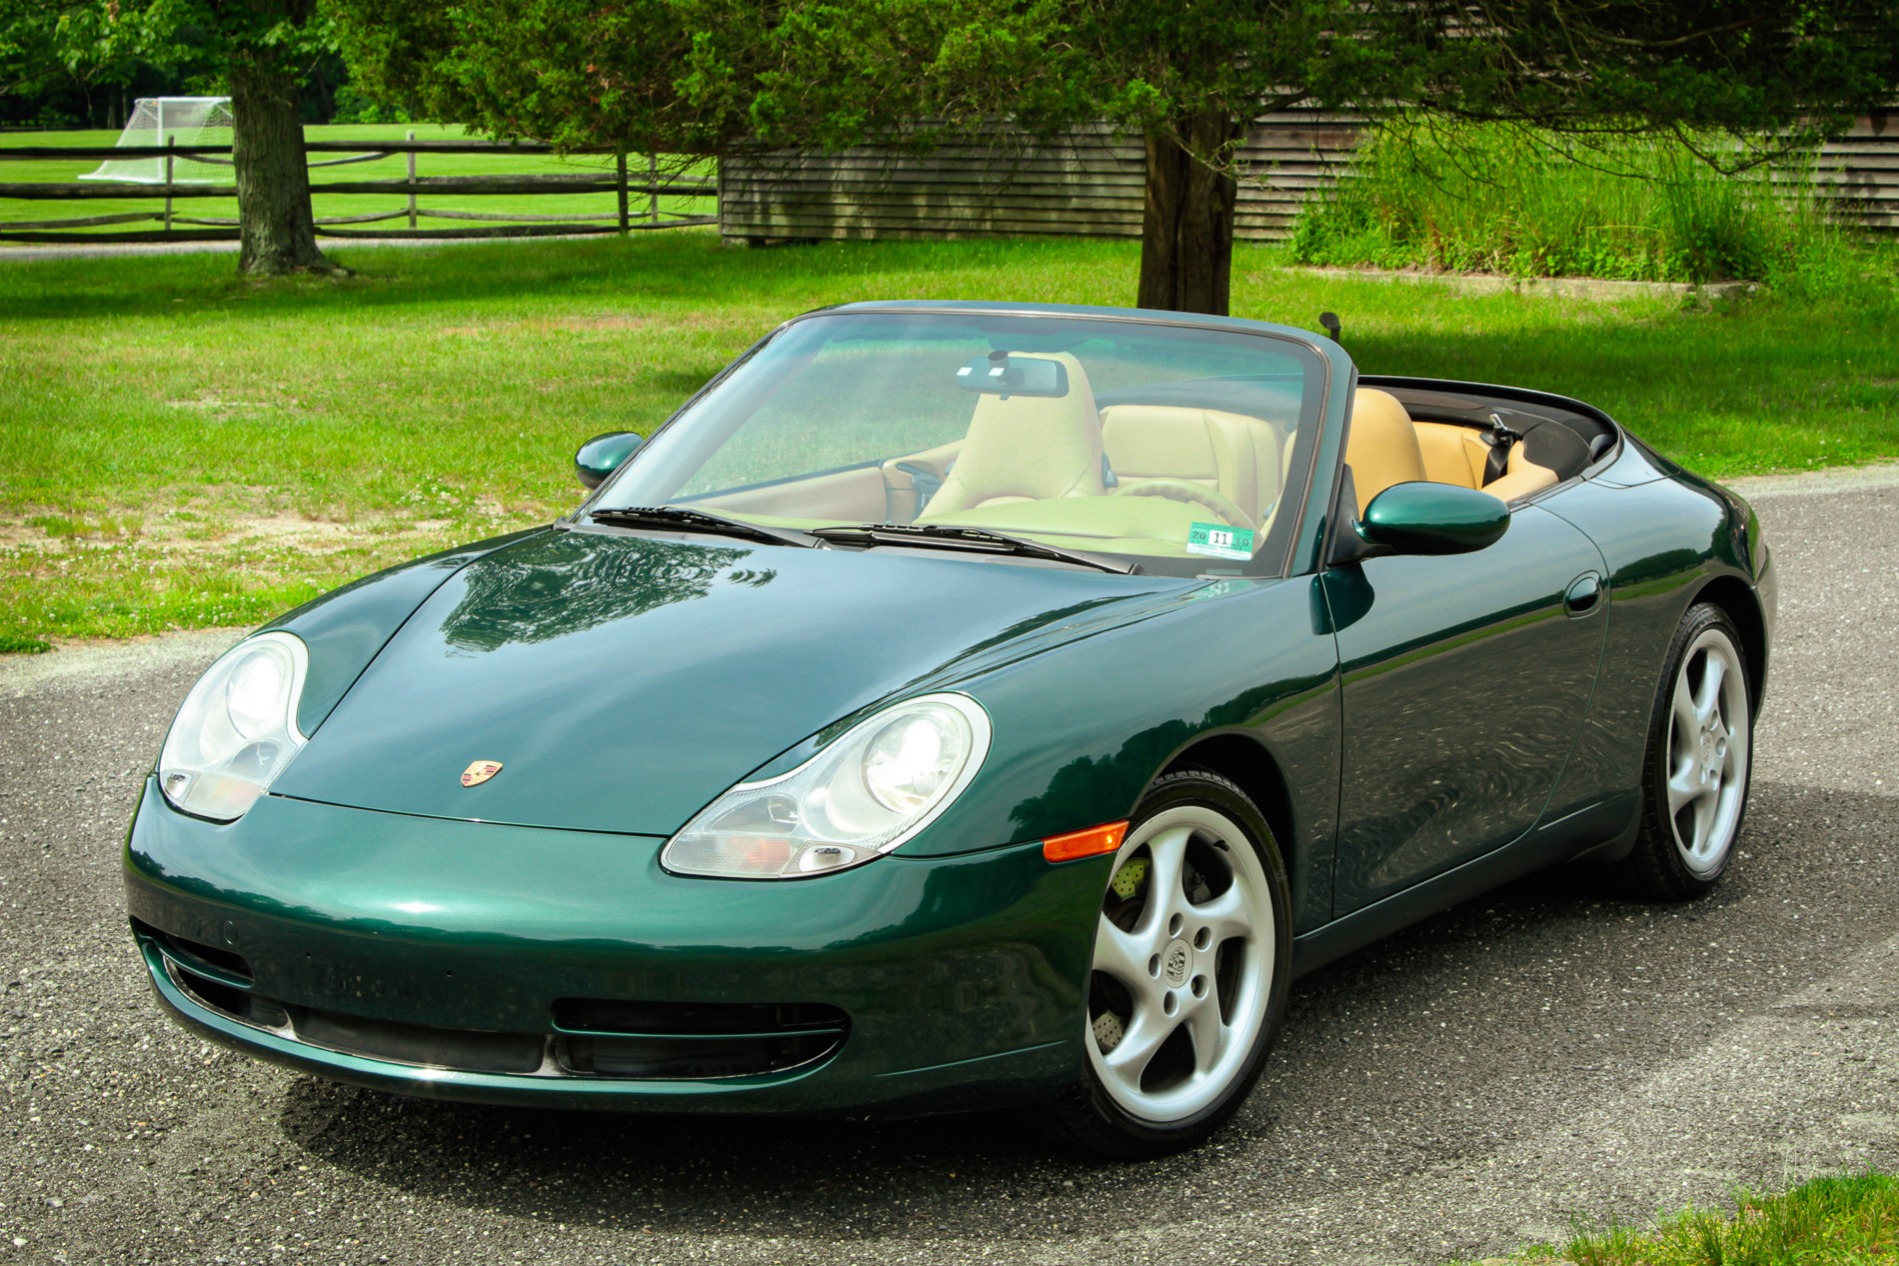 Used 2001 Porsche 911 Carrera Cabriolet 6-Speed Review